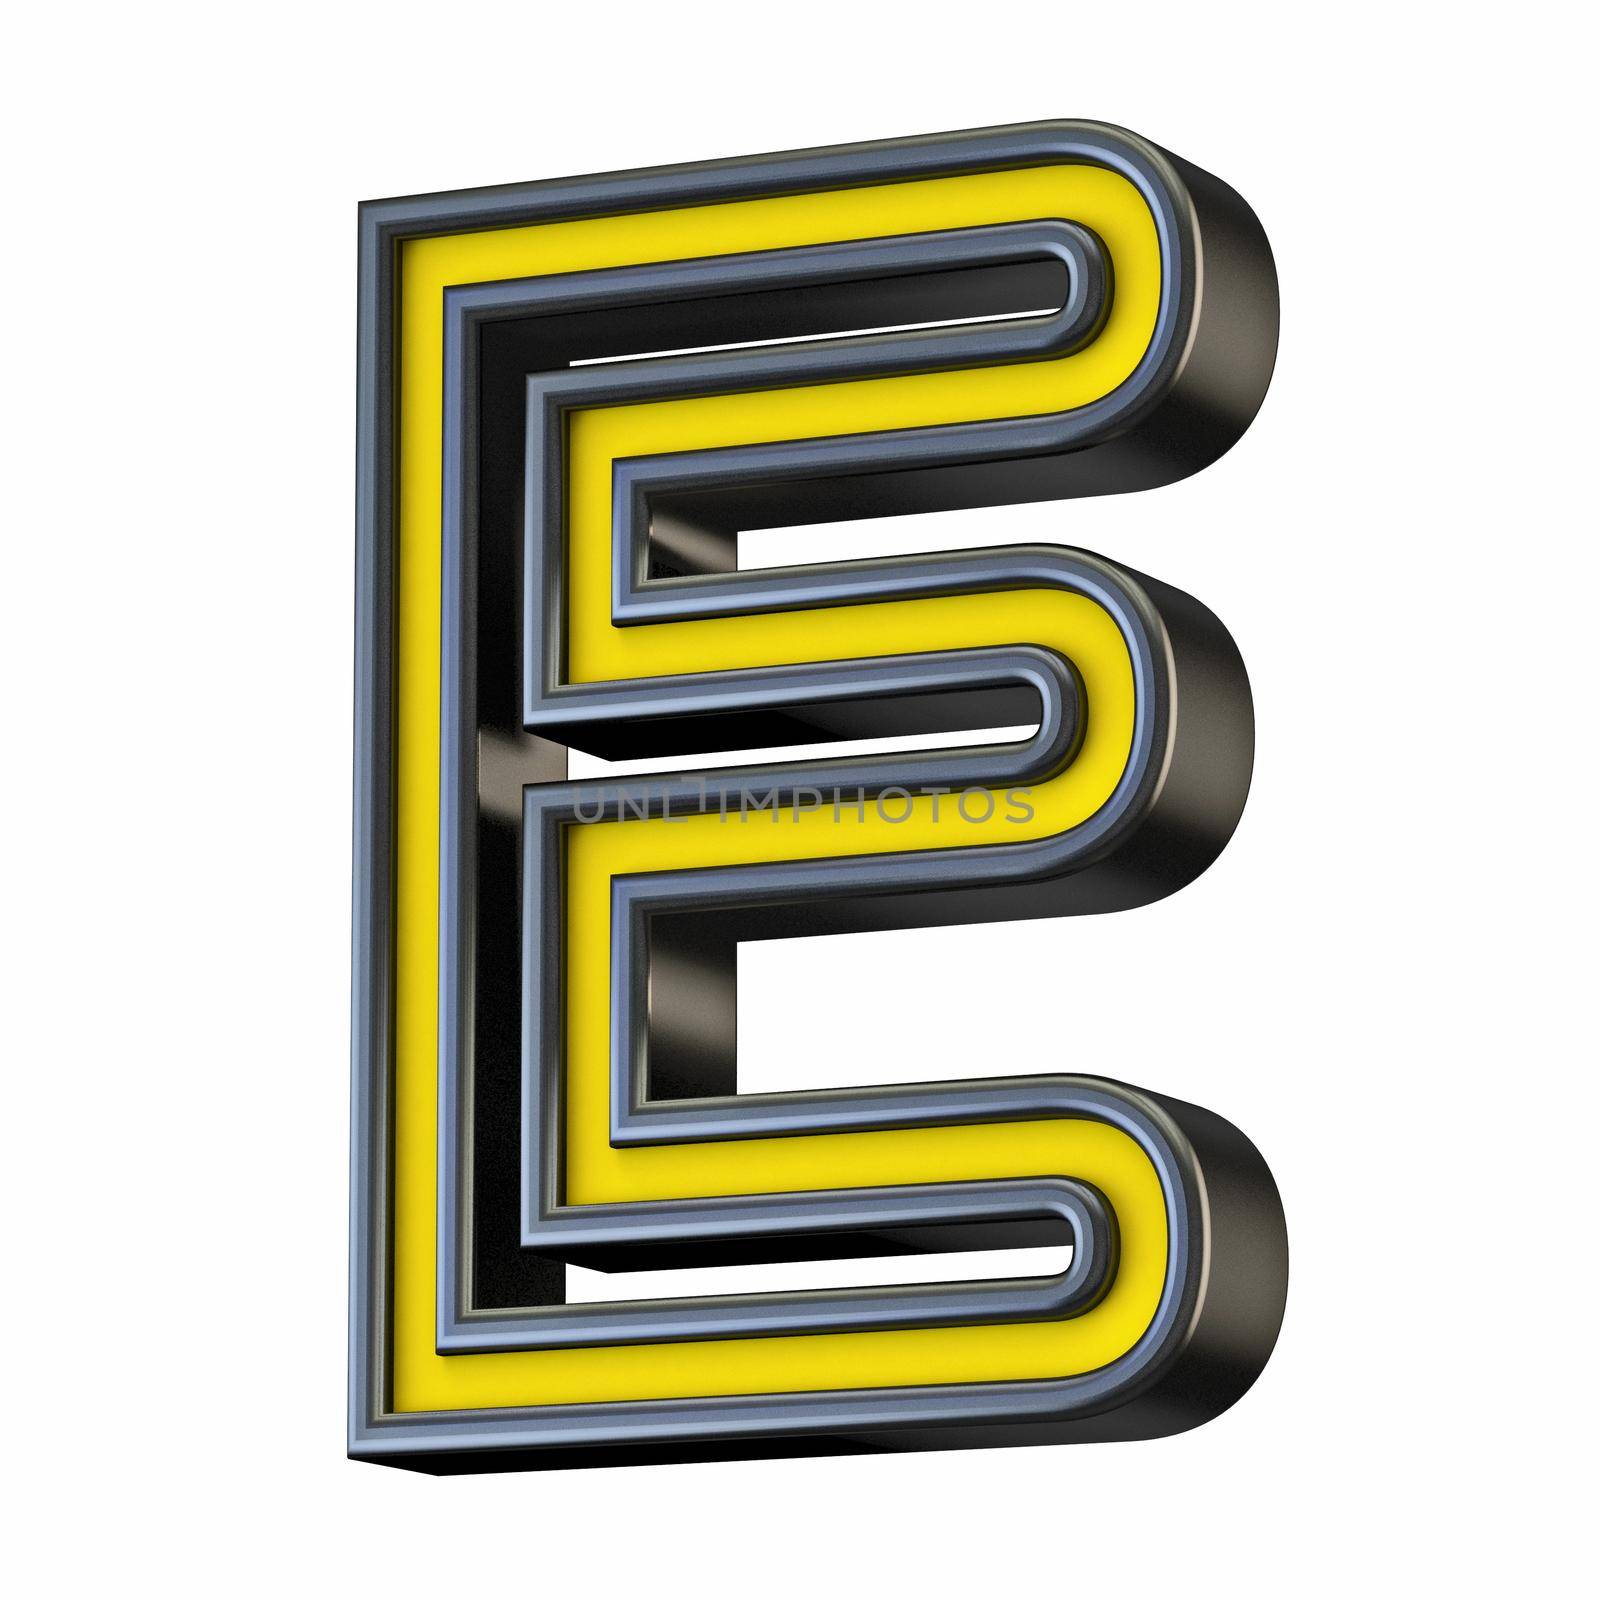 Yellow black outlined font Letter E 3D rendering illustration isolated on white background